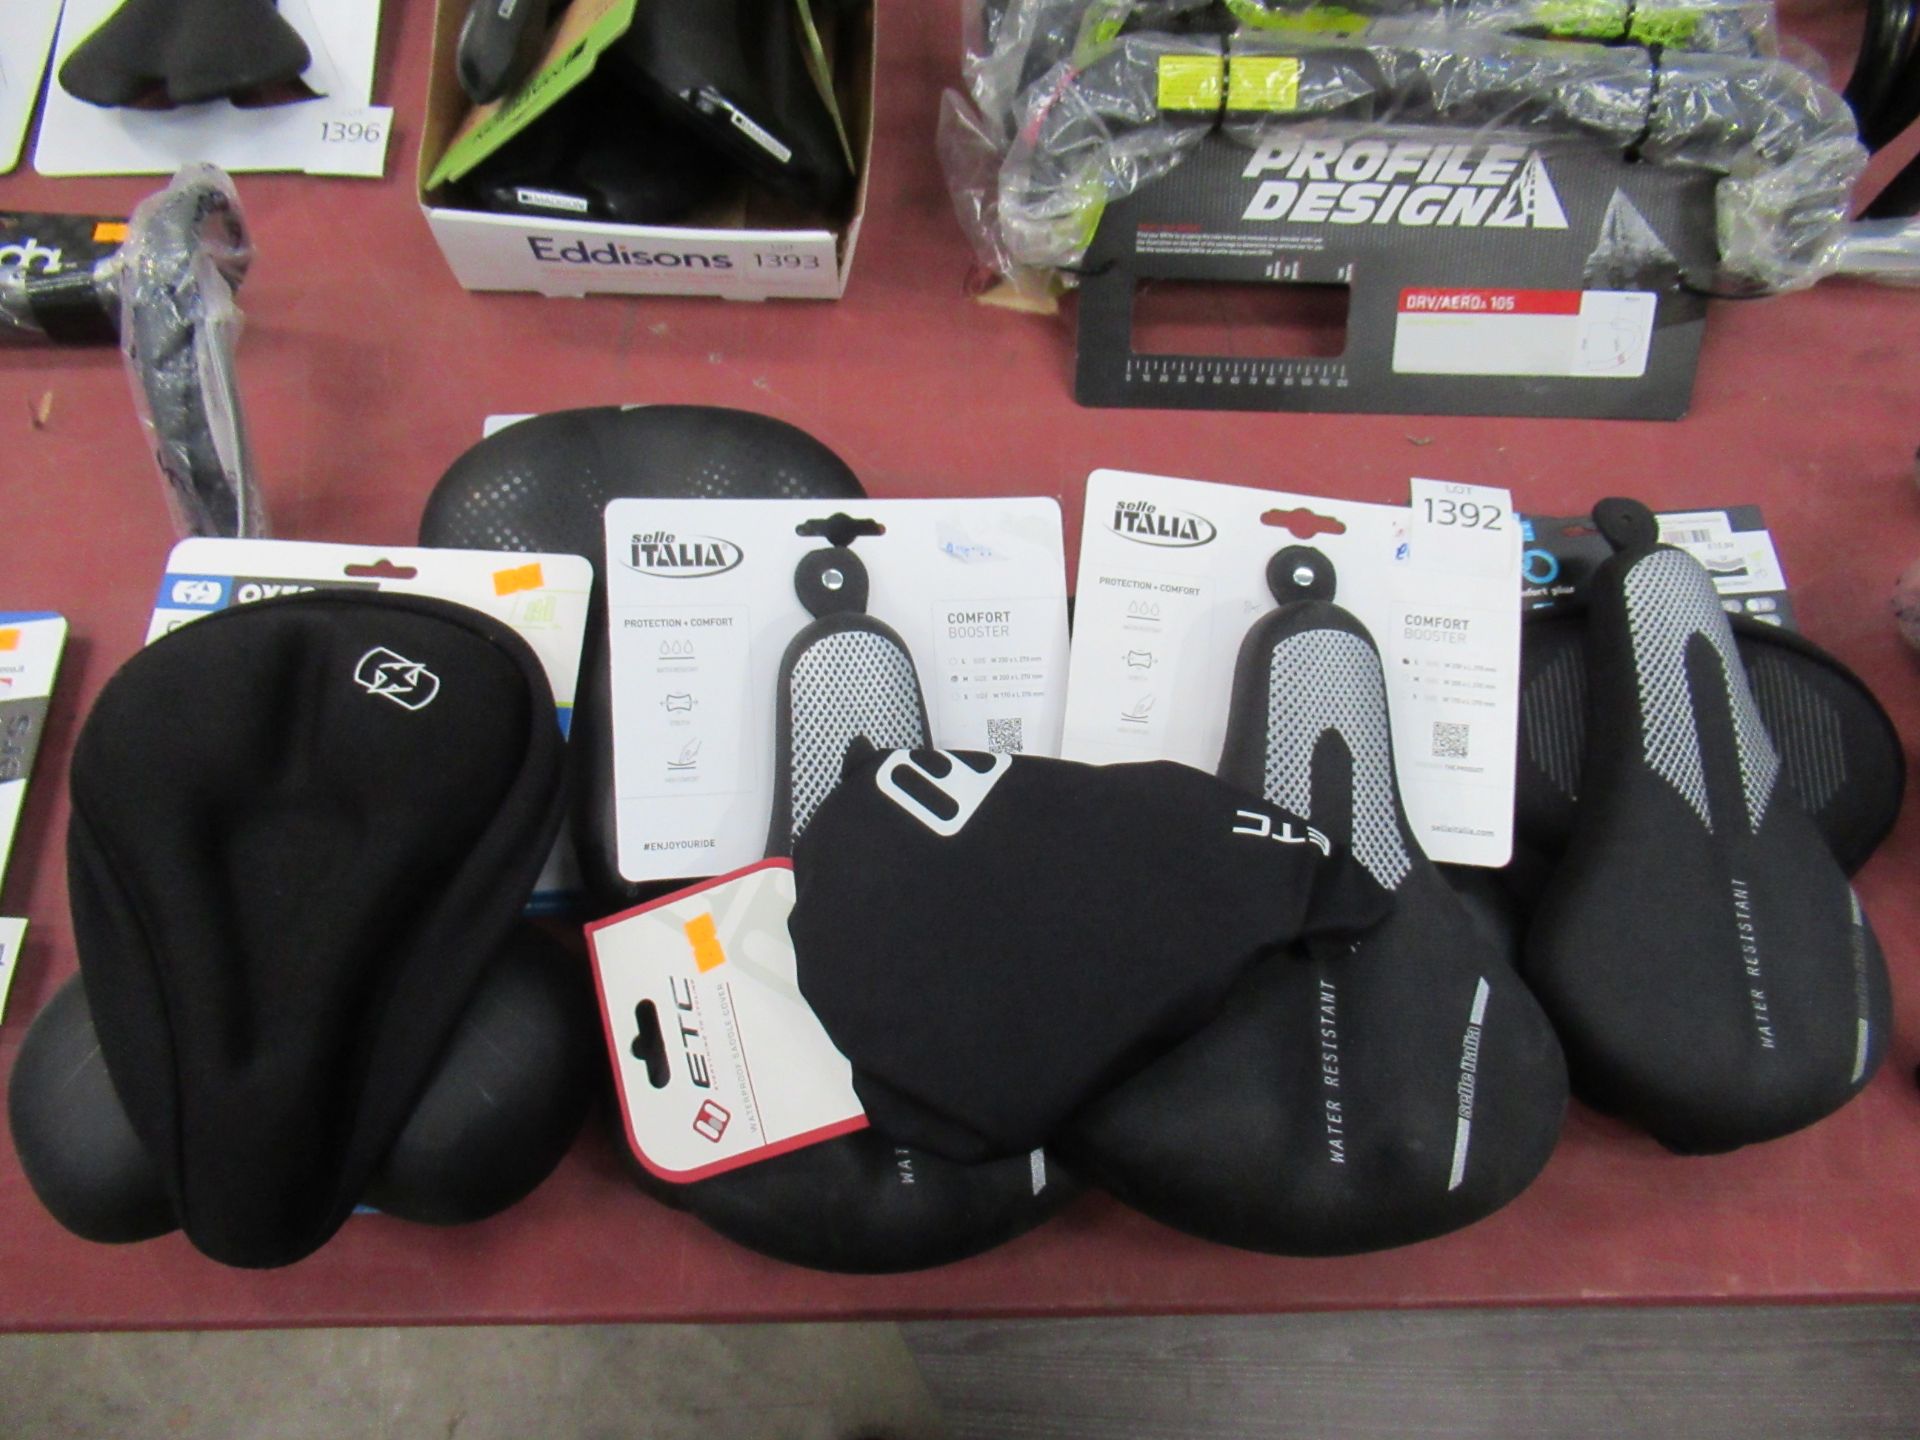 Assorted saddles and saddle covers/booster from Selle Italia, DDK, Oxford etc.